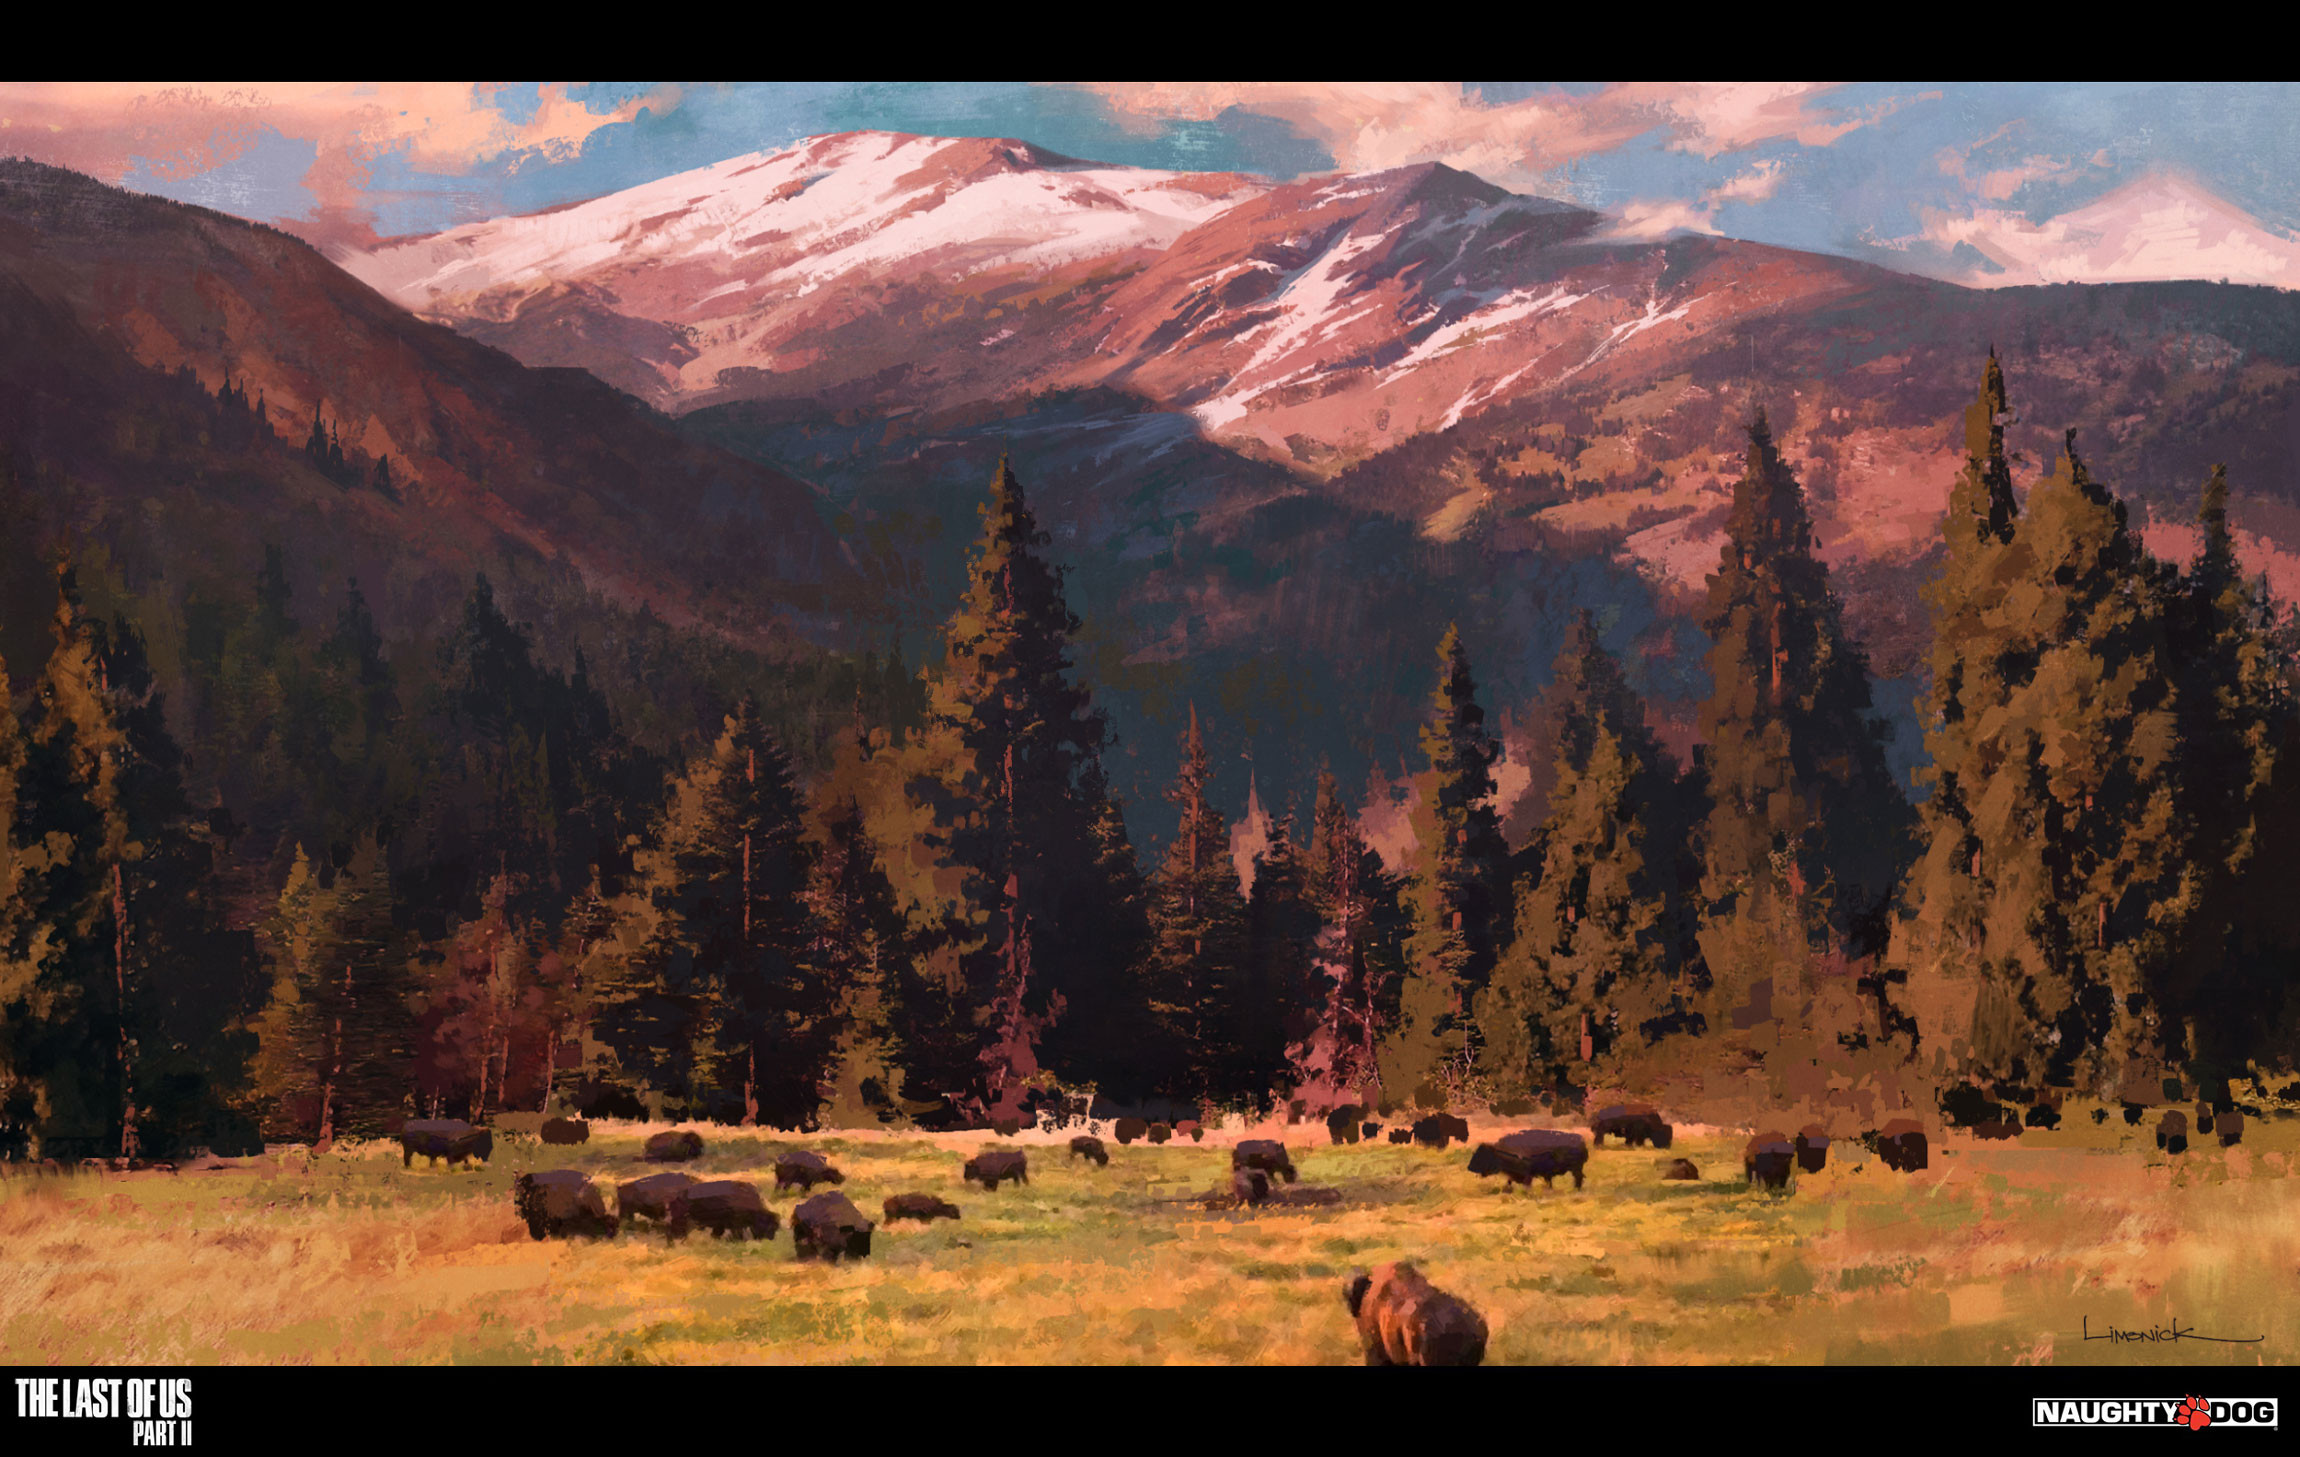 General 2300x1457 Aaron Limonick The Last of Us 2 digital art wildlife forest mountains